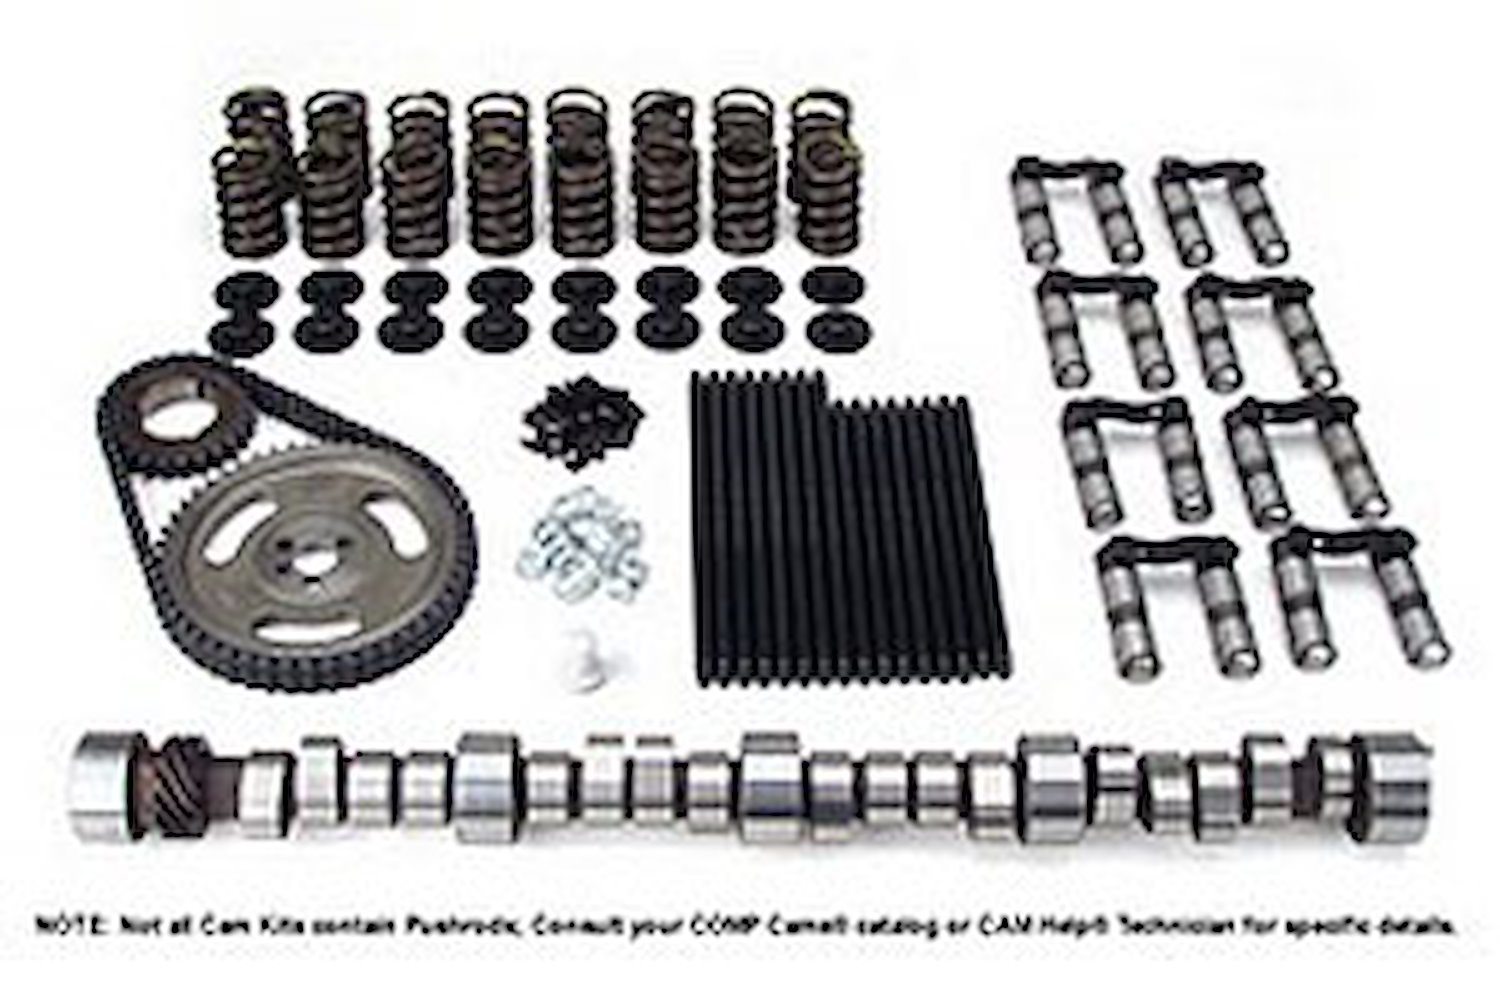 Magnum Hydraulic Roller Camshaft Complete Kit Chevy Big Block 396-454 Retro Fit Lift: .578"/.578"